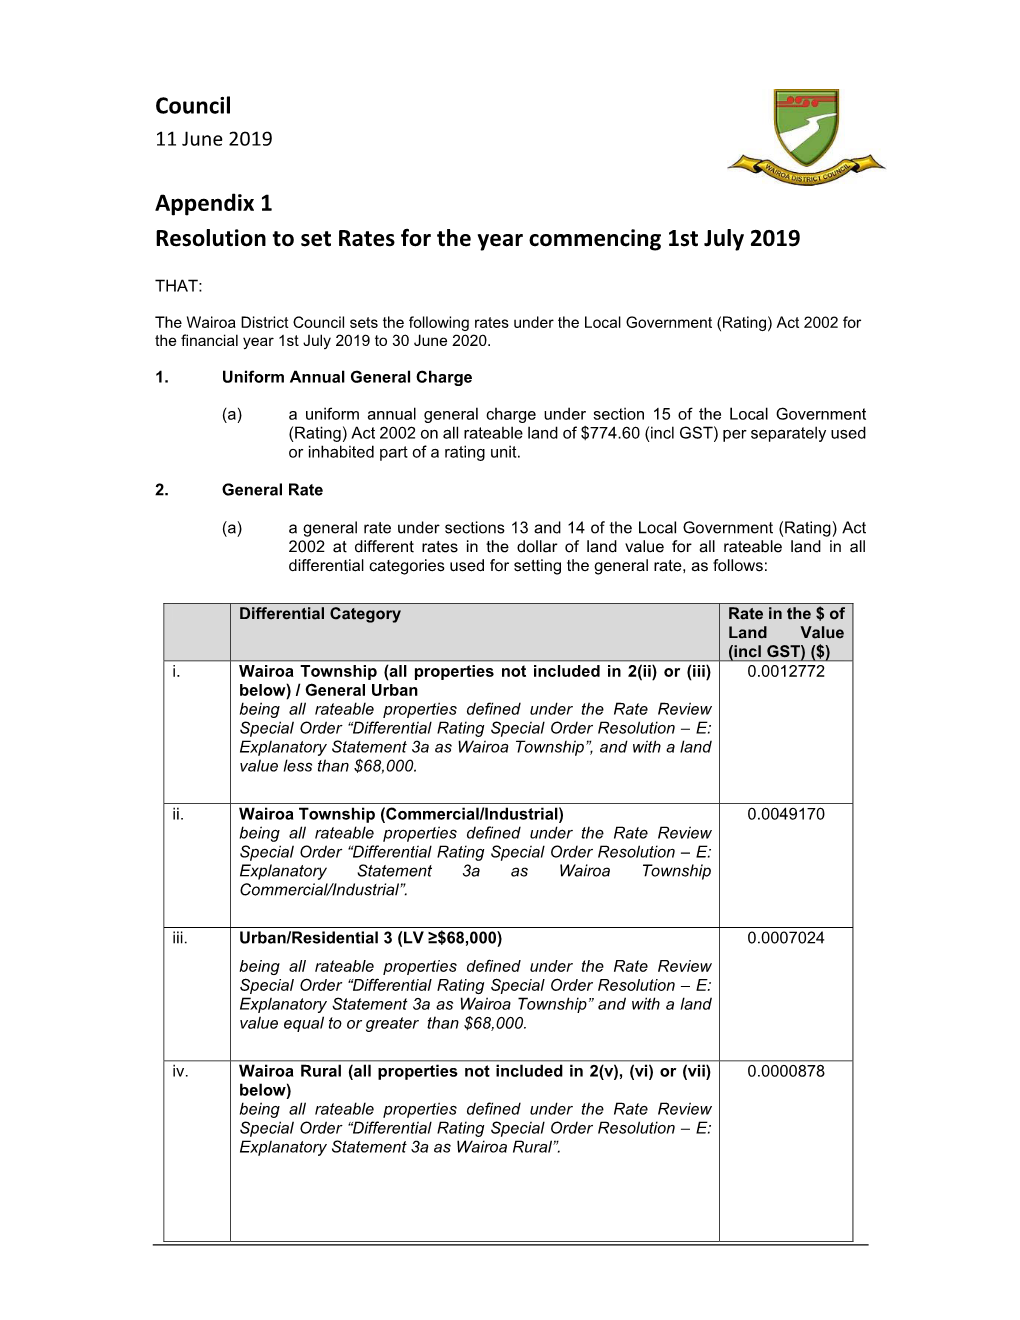 Appendix 1 Resolution to Set Rates for the Year Commencing 1St July 2019